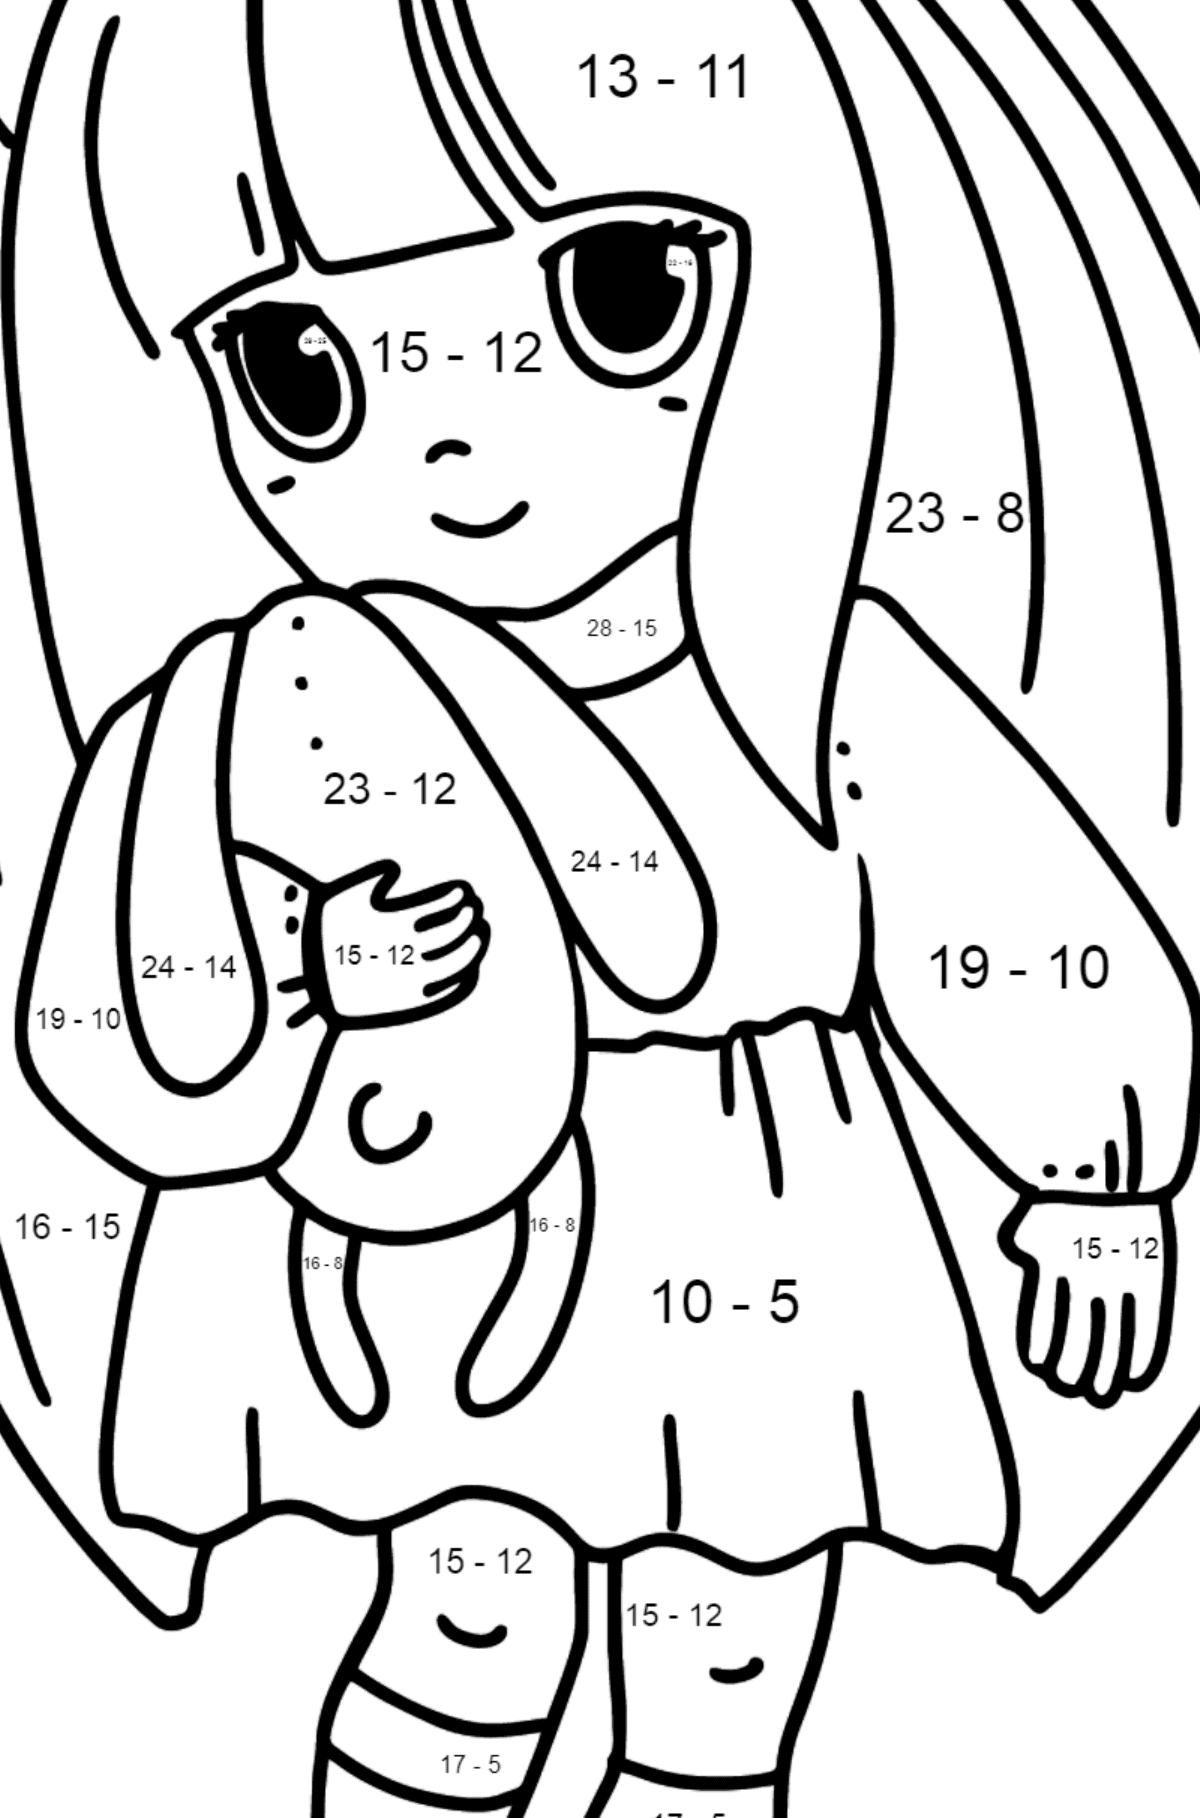 Anime Little Girl Coloring Pages - Math Coloring - Subtraction for Kids